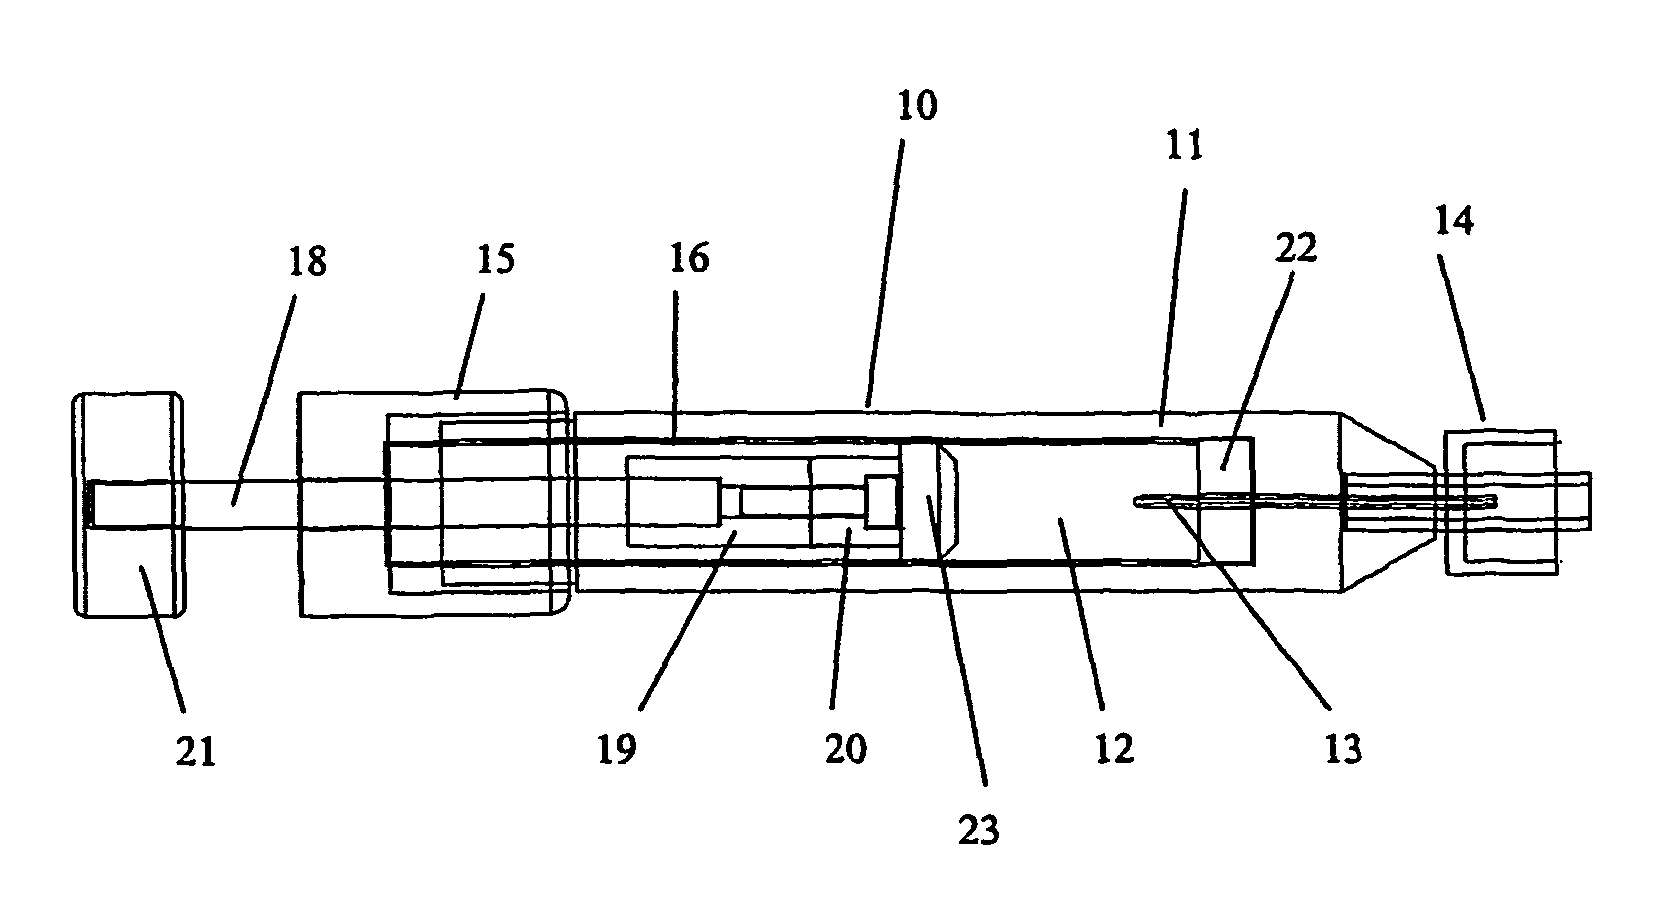 Injector for viscous materials